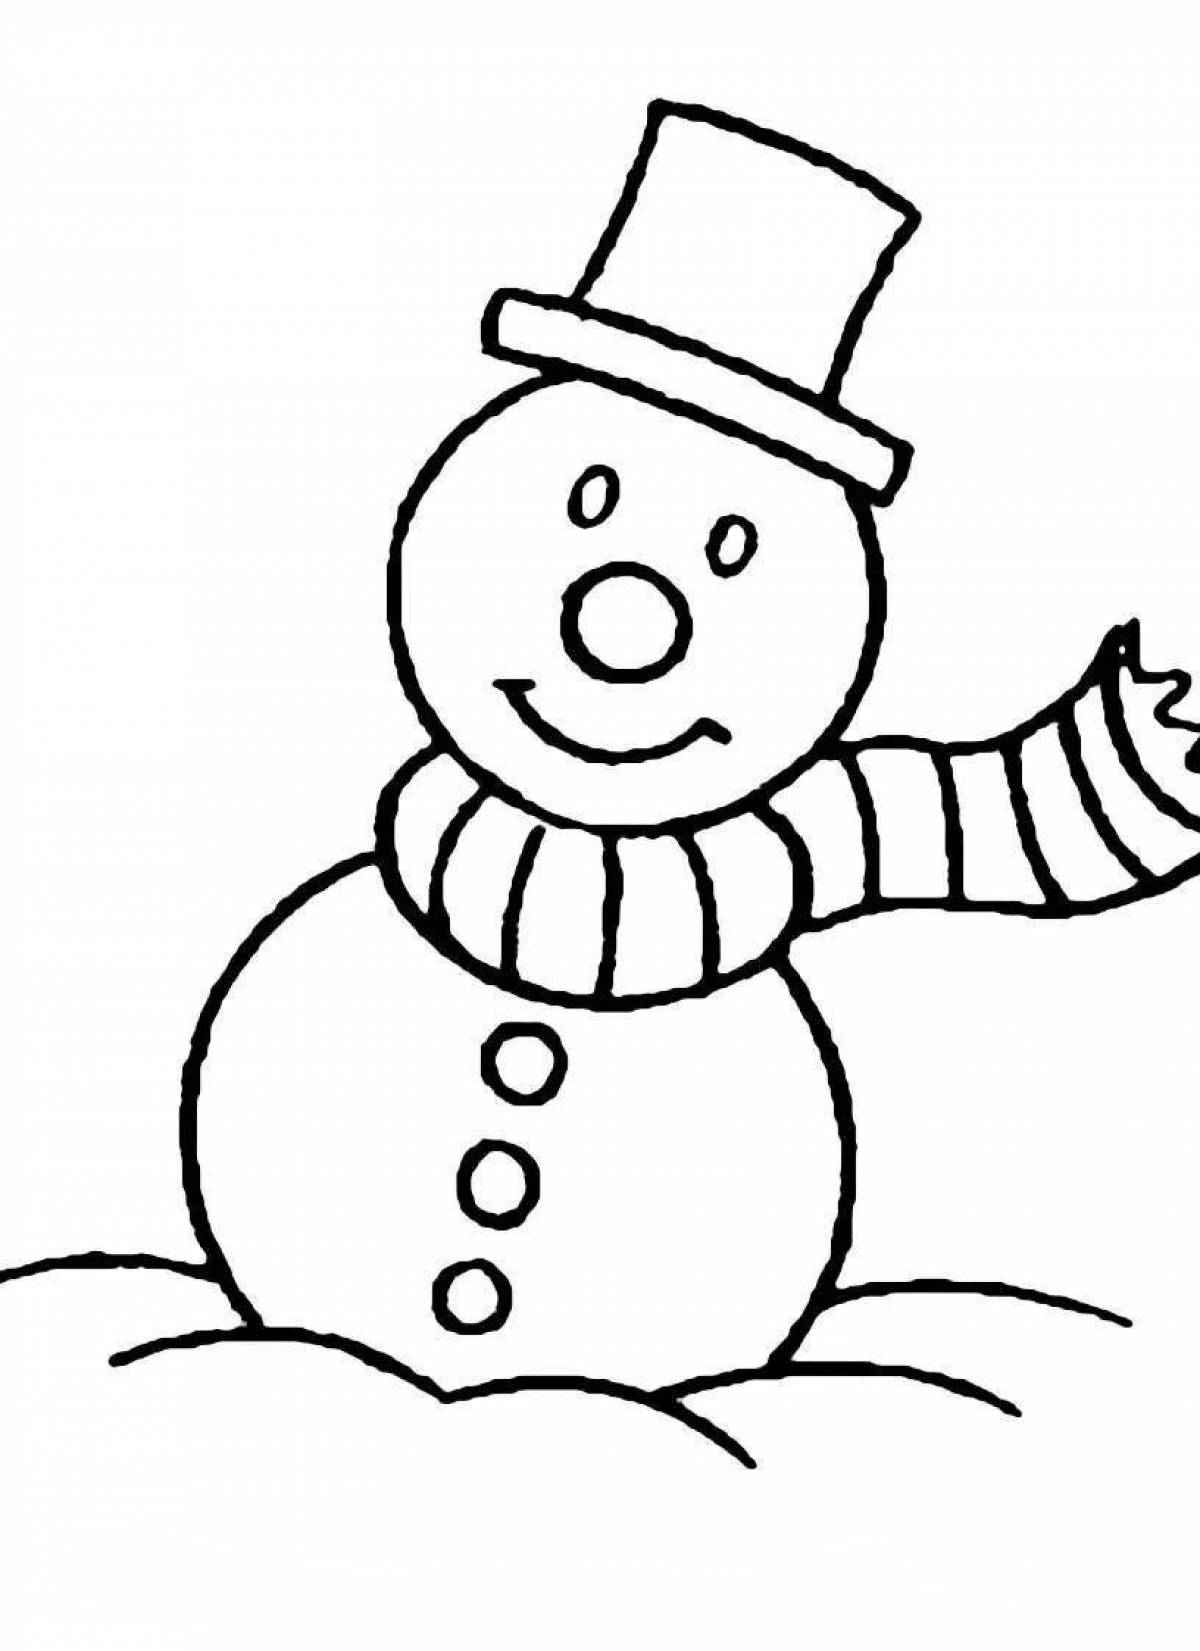 Playful snowman coloring for kids 2 3